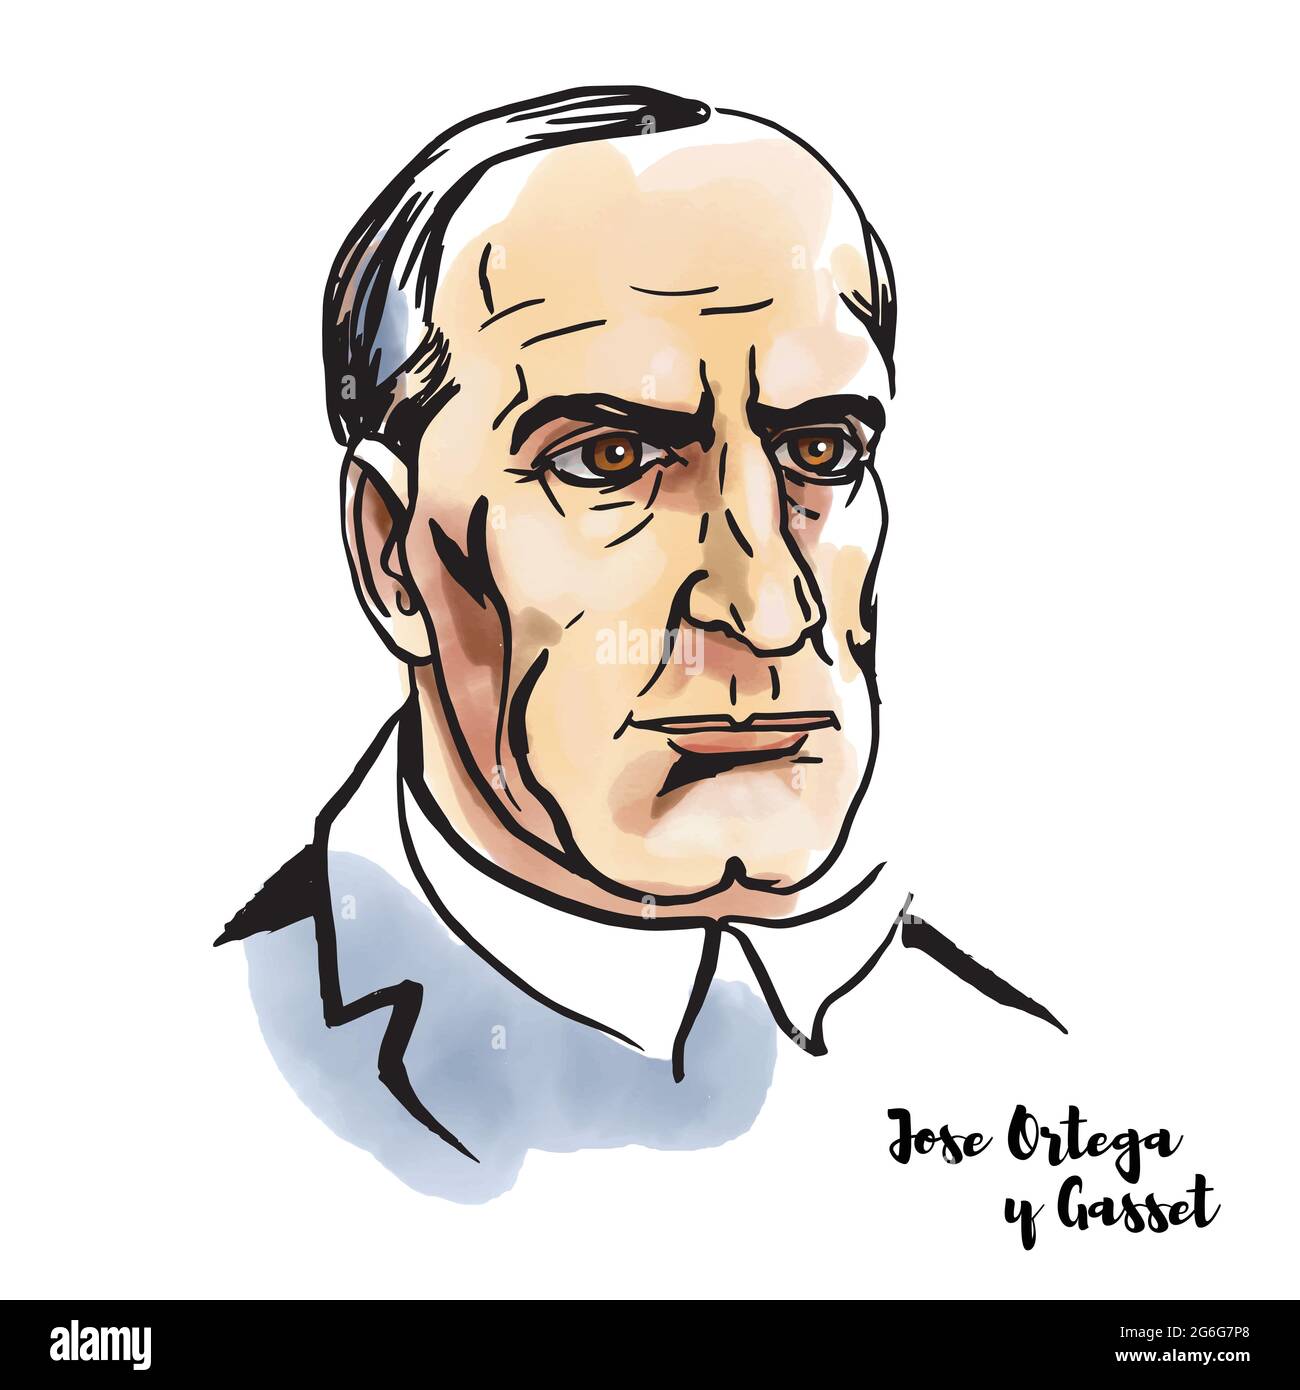 RUSSIA, MOSCOW - June, 01, 2019: Jose Ortega y Gasset watercolor vector portrait with ink contours.  Spanish philosopher and essayist. Stock Vector